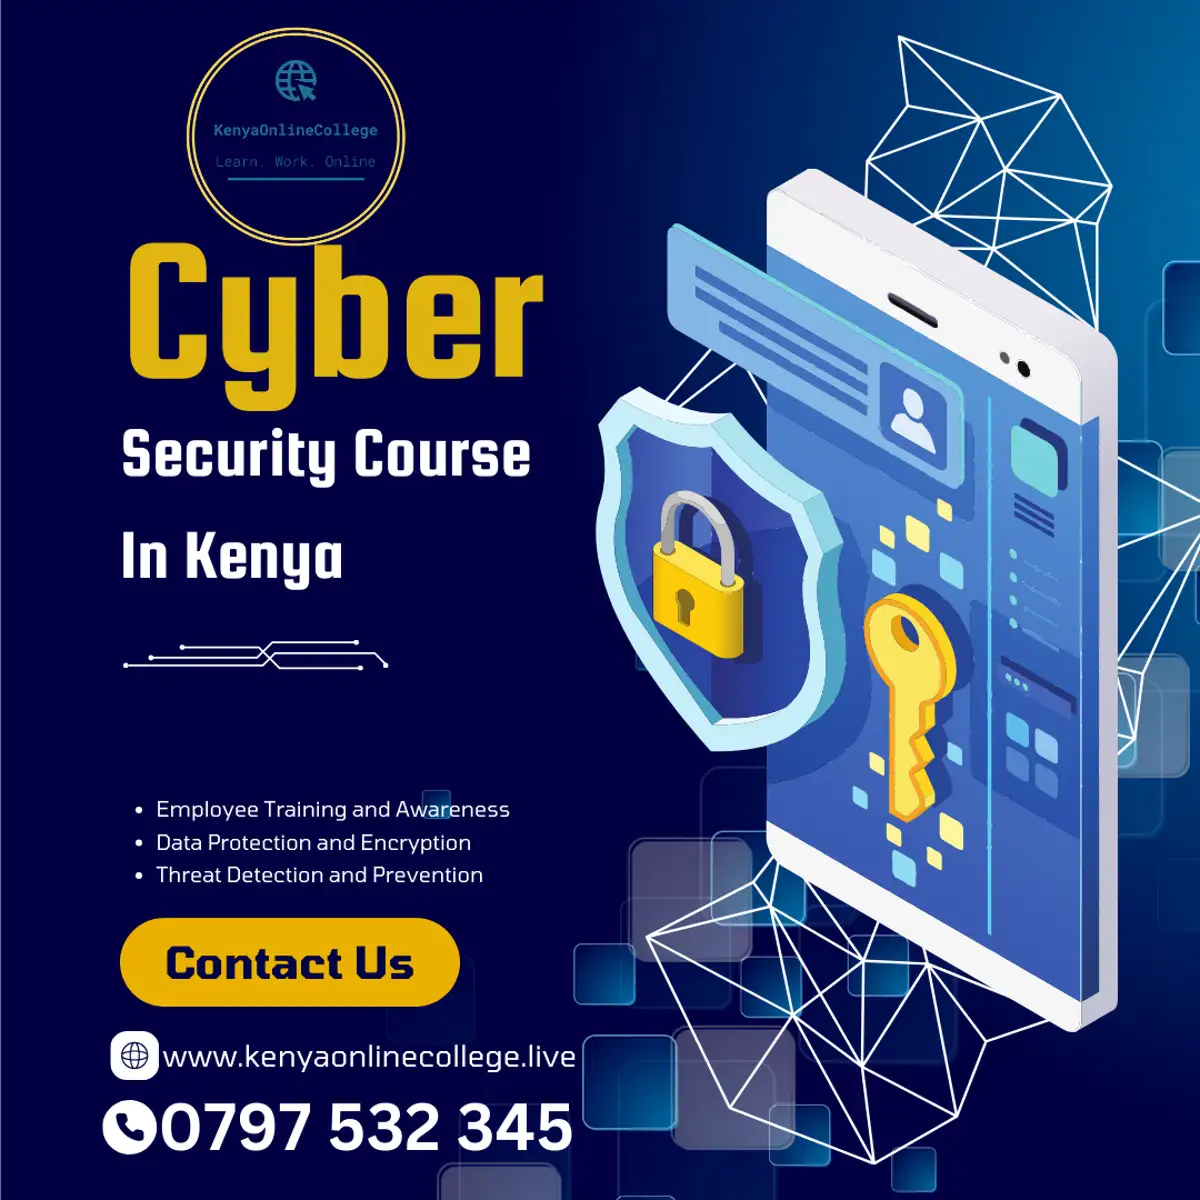 Cyber security course in Kenya